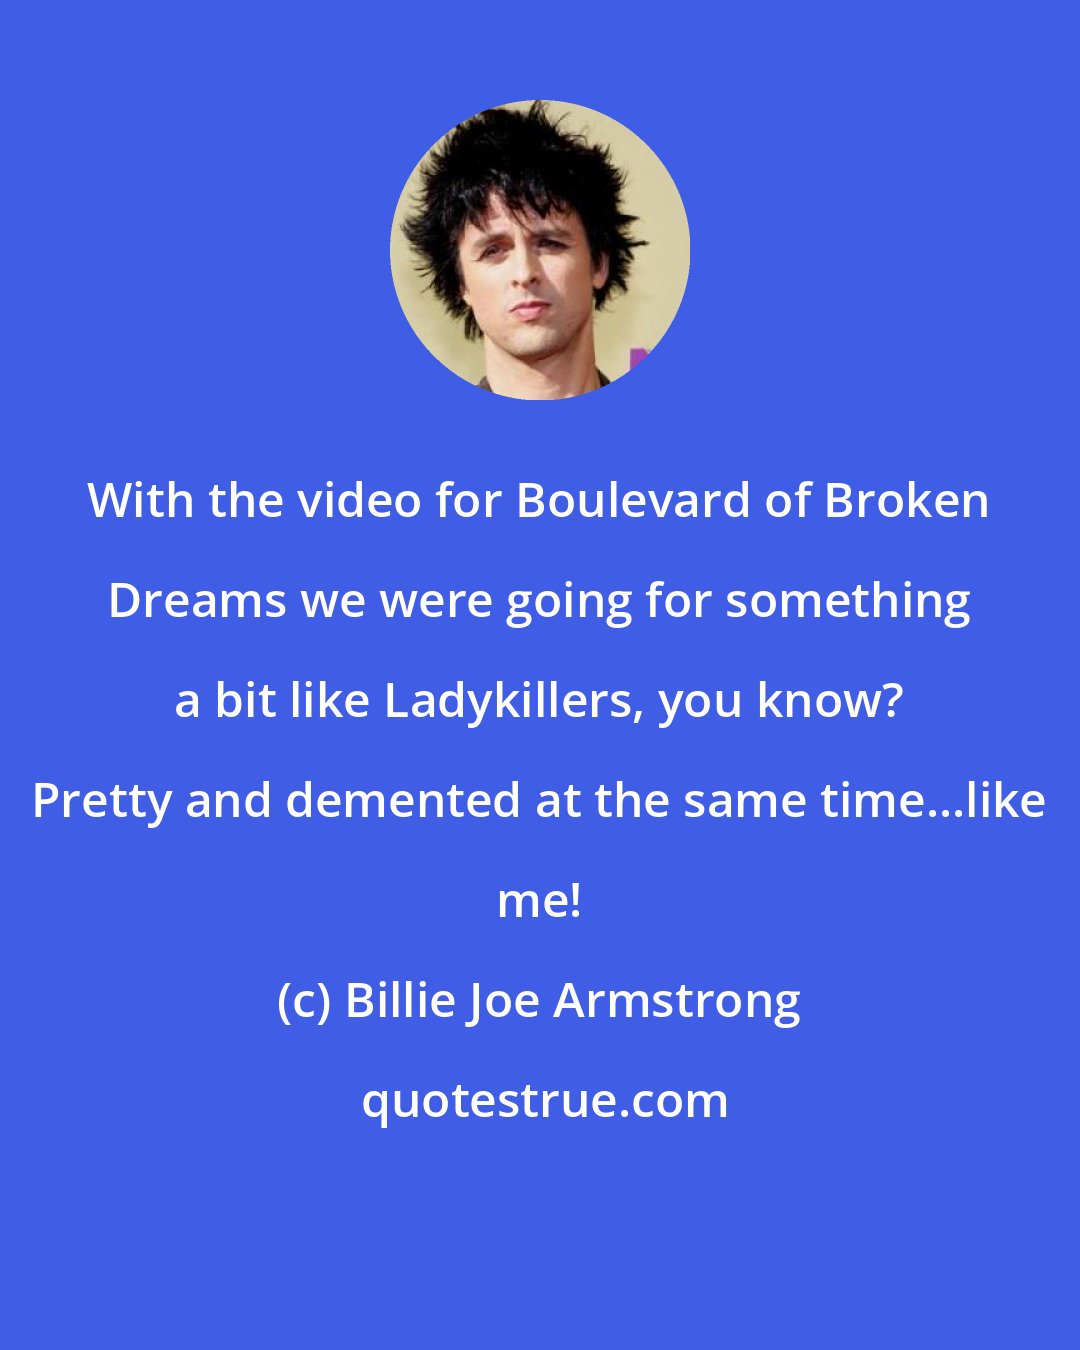 Billie Joe Armstrong: With the video for Boulevard of Broken Dreams we were going for something a bit like Ladykillers, you know? Pretty and demented at the same time...like me!